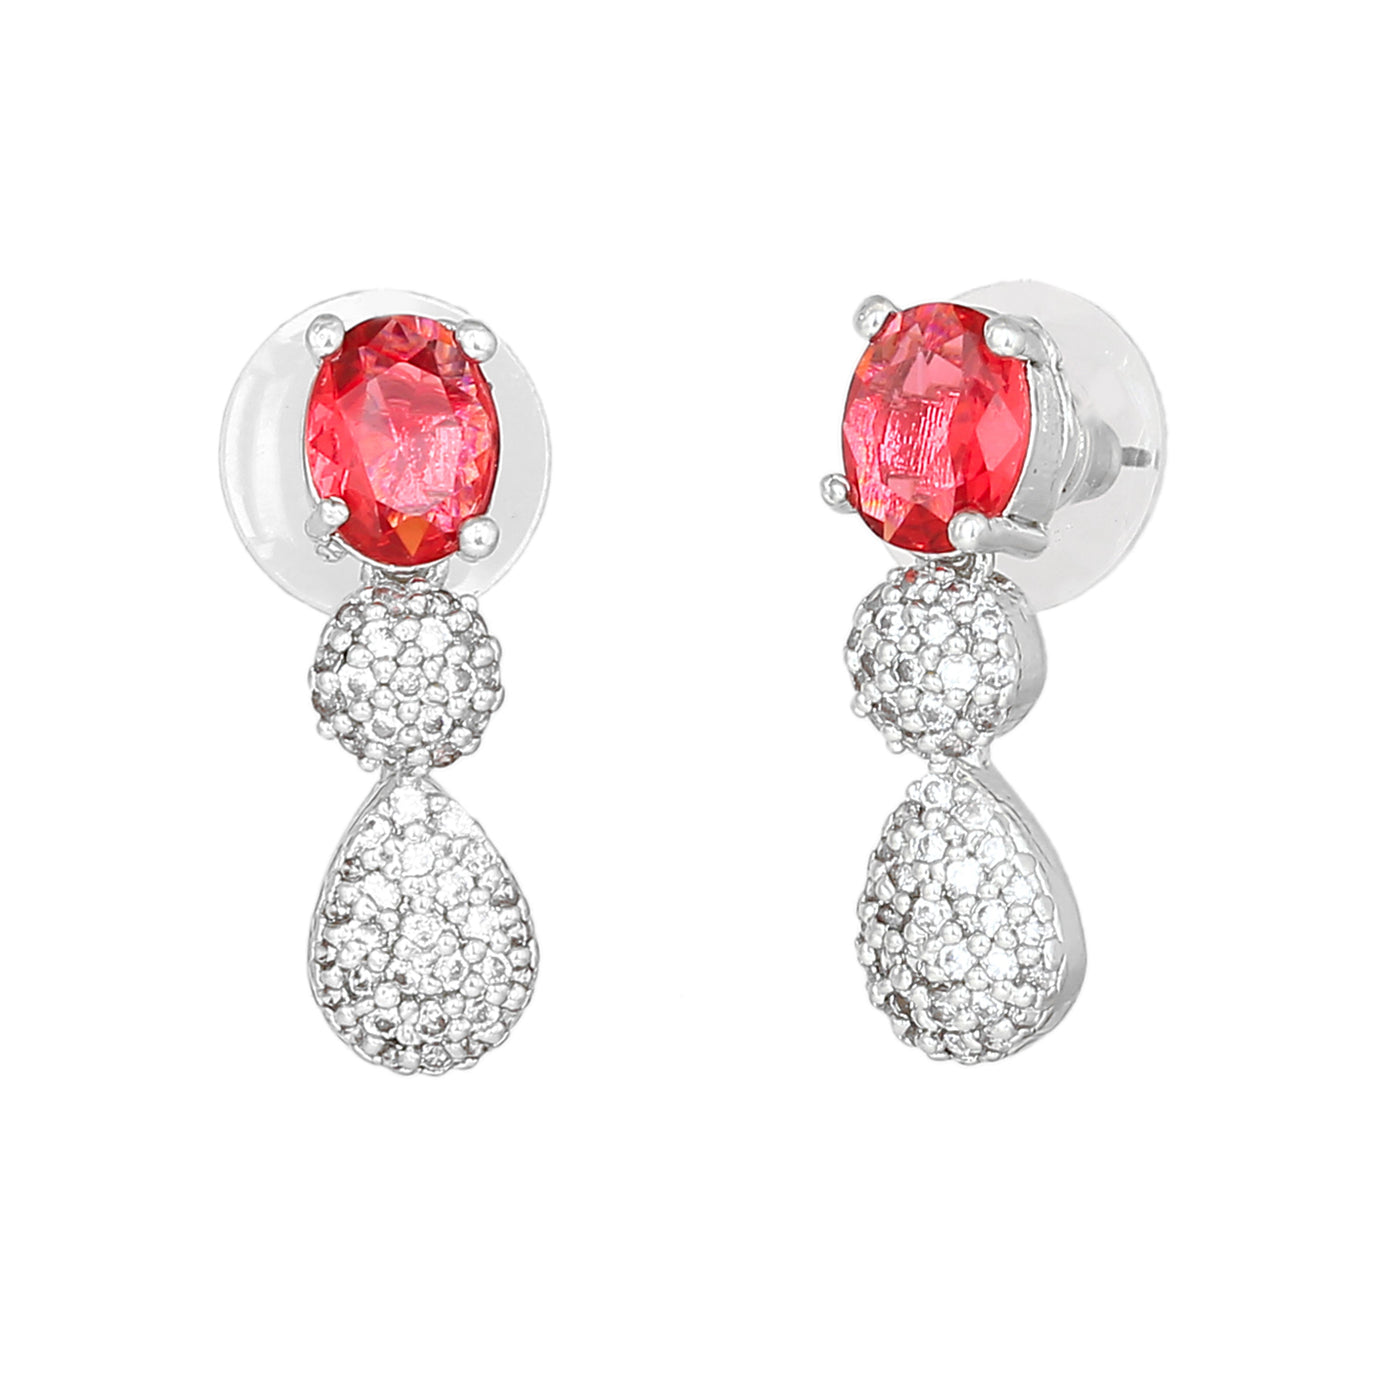 Estele Rhodium Plated CZ Charming Earrings with Tourmaline Pink for Women